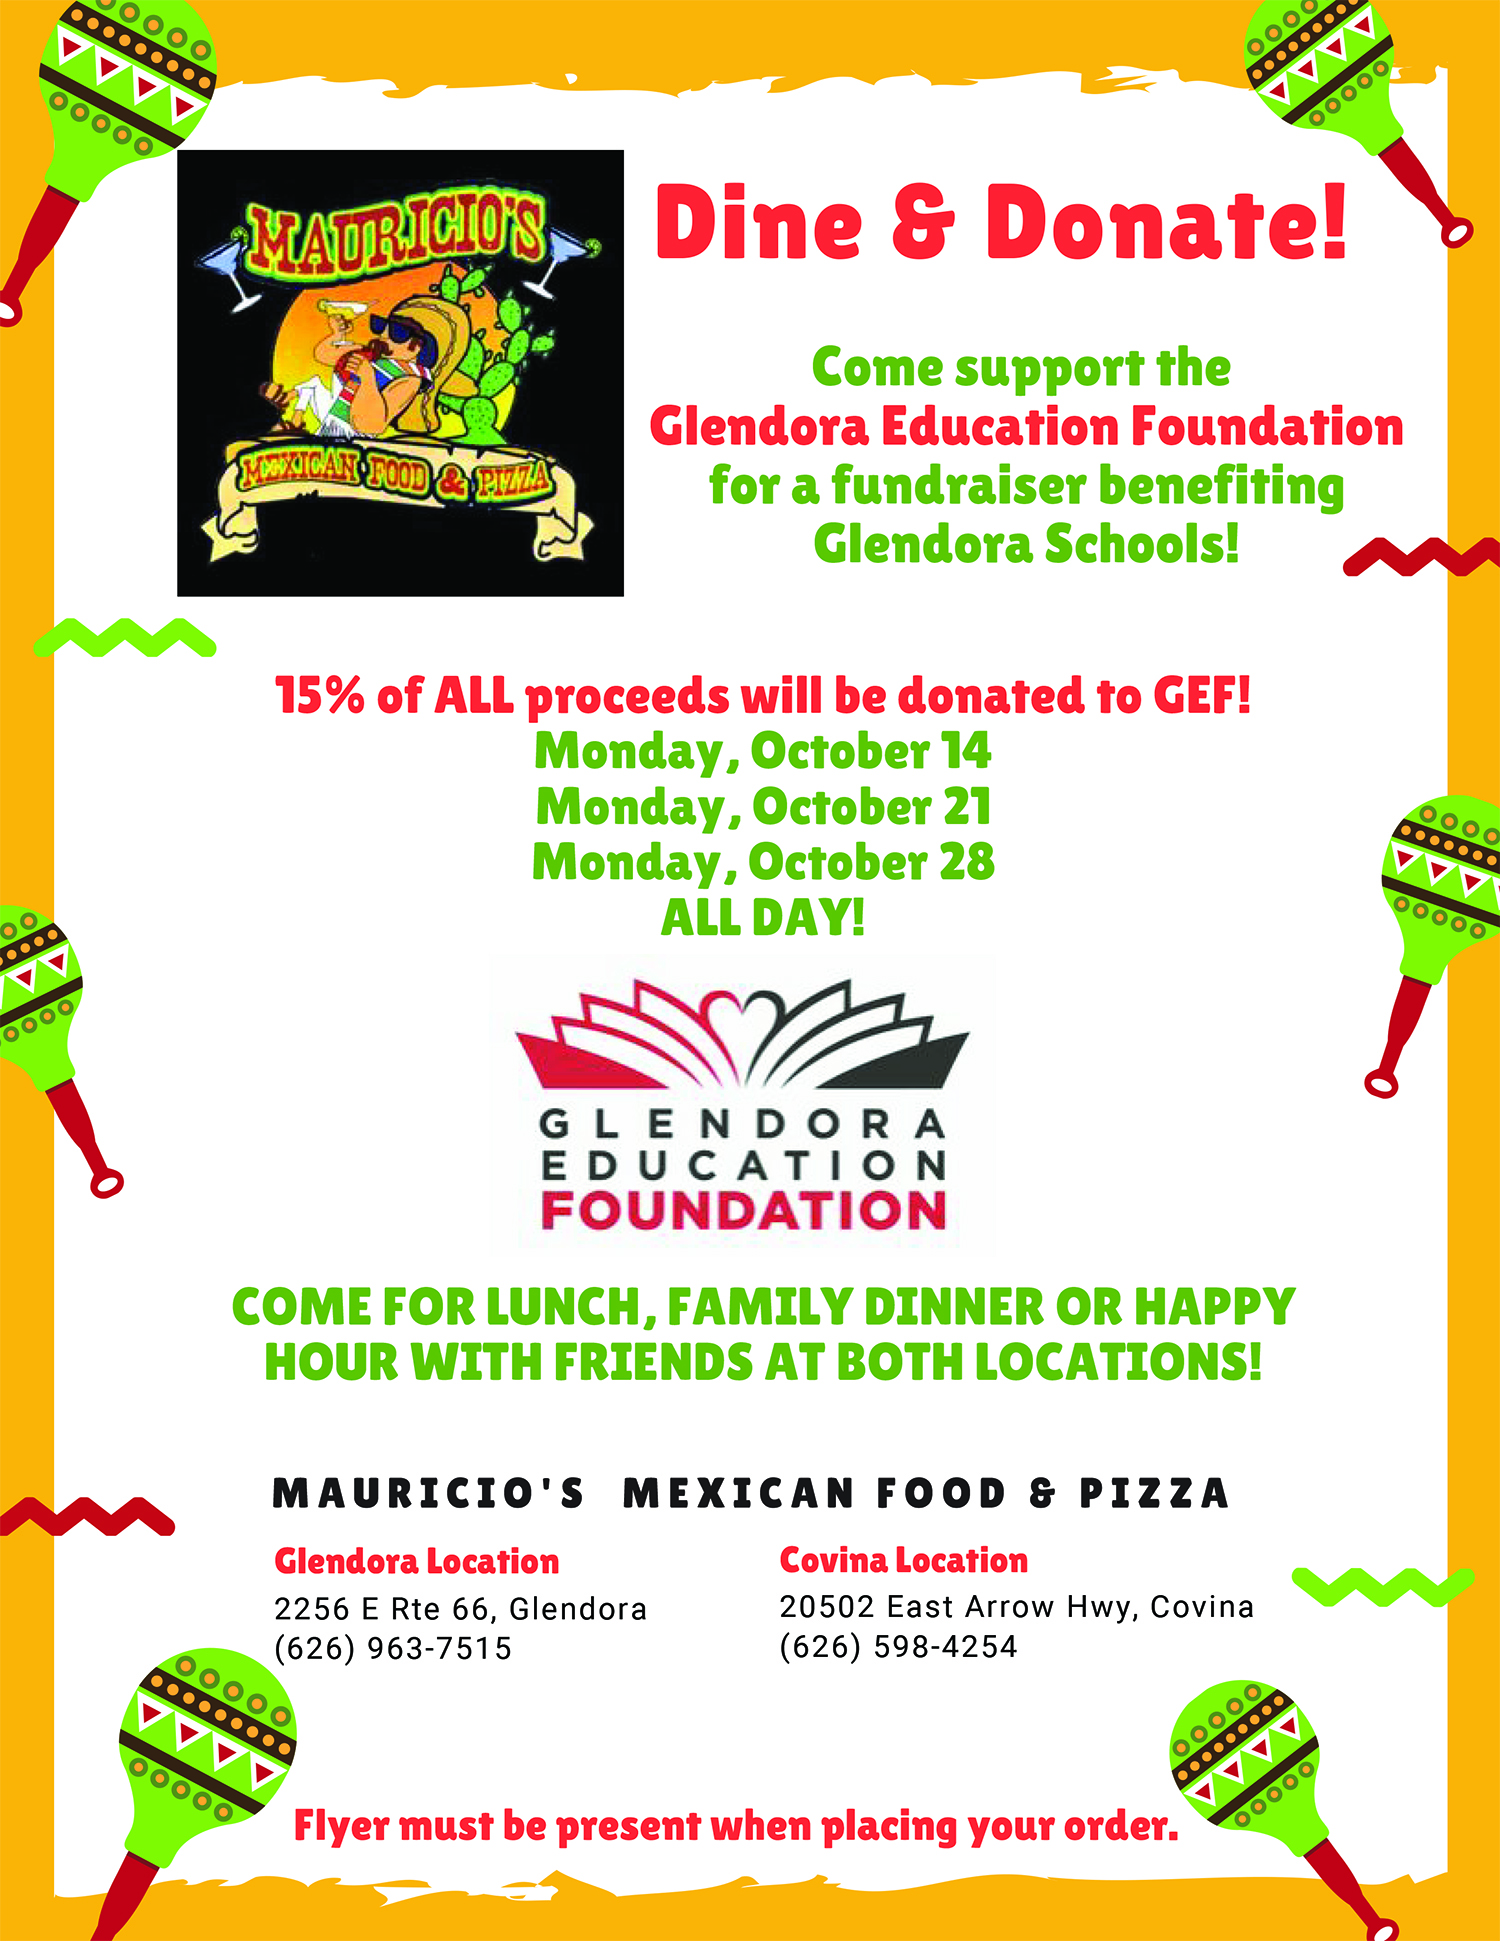 Visit Mauricio's any Monday remaining in October to support GEF